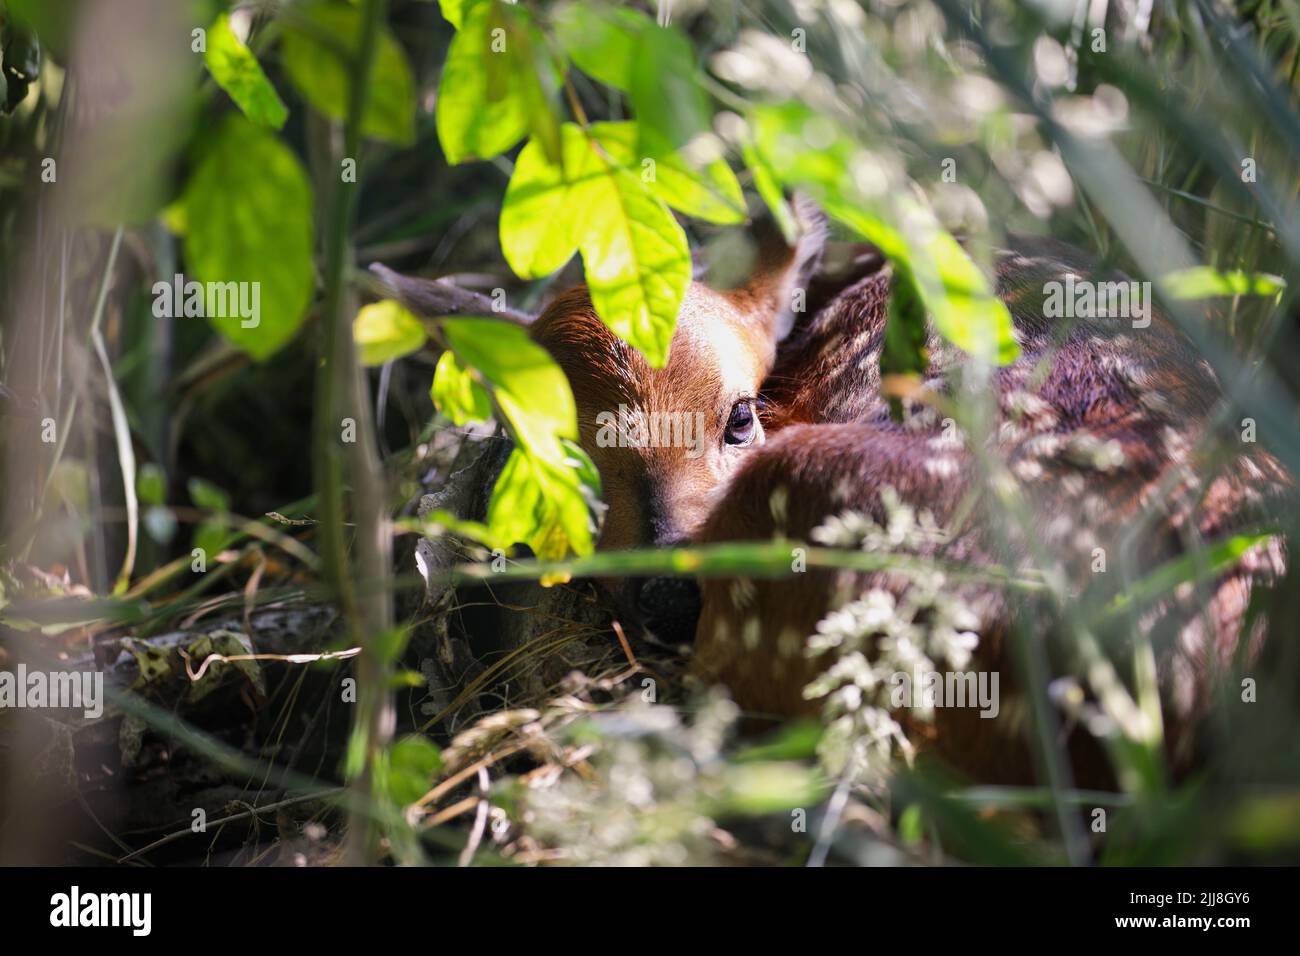 Cute little baby fawn hidden by its mother in a wooden thicket with sun beams, curls up to avoid detection. Selective focus with blurred background. Stock Photo